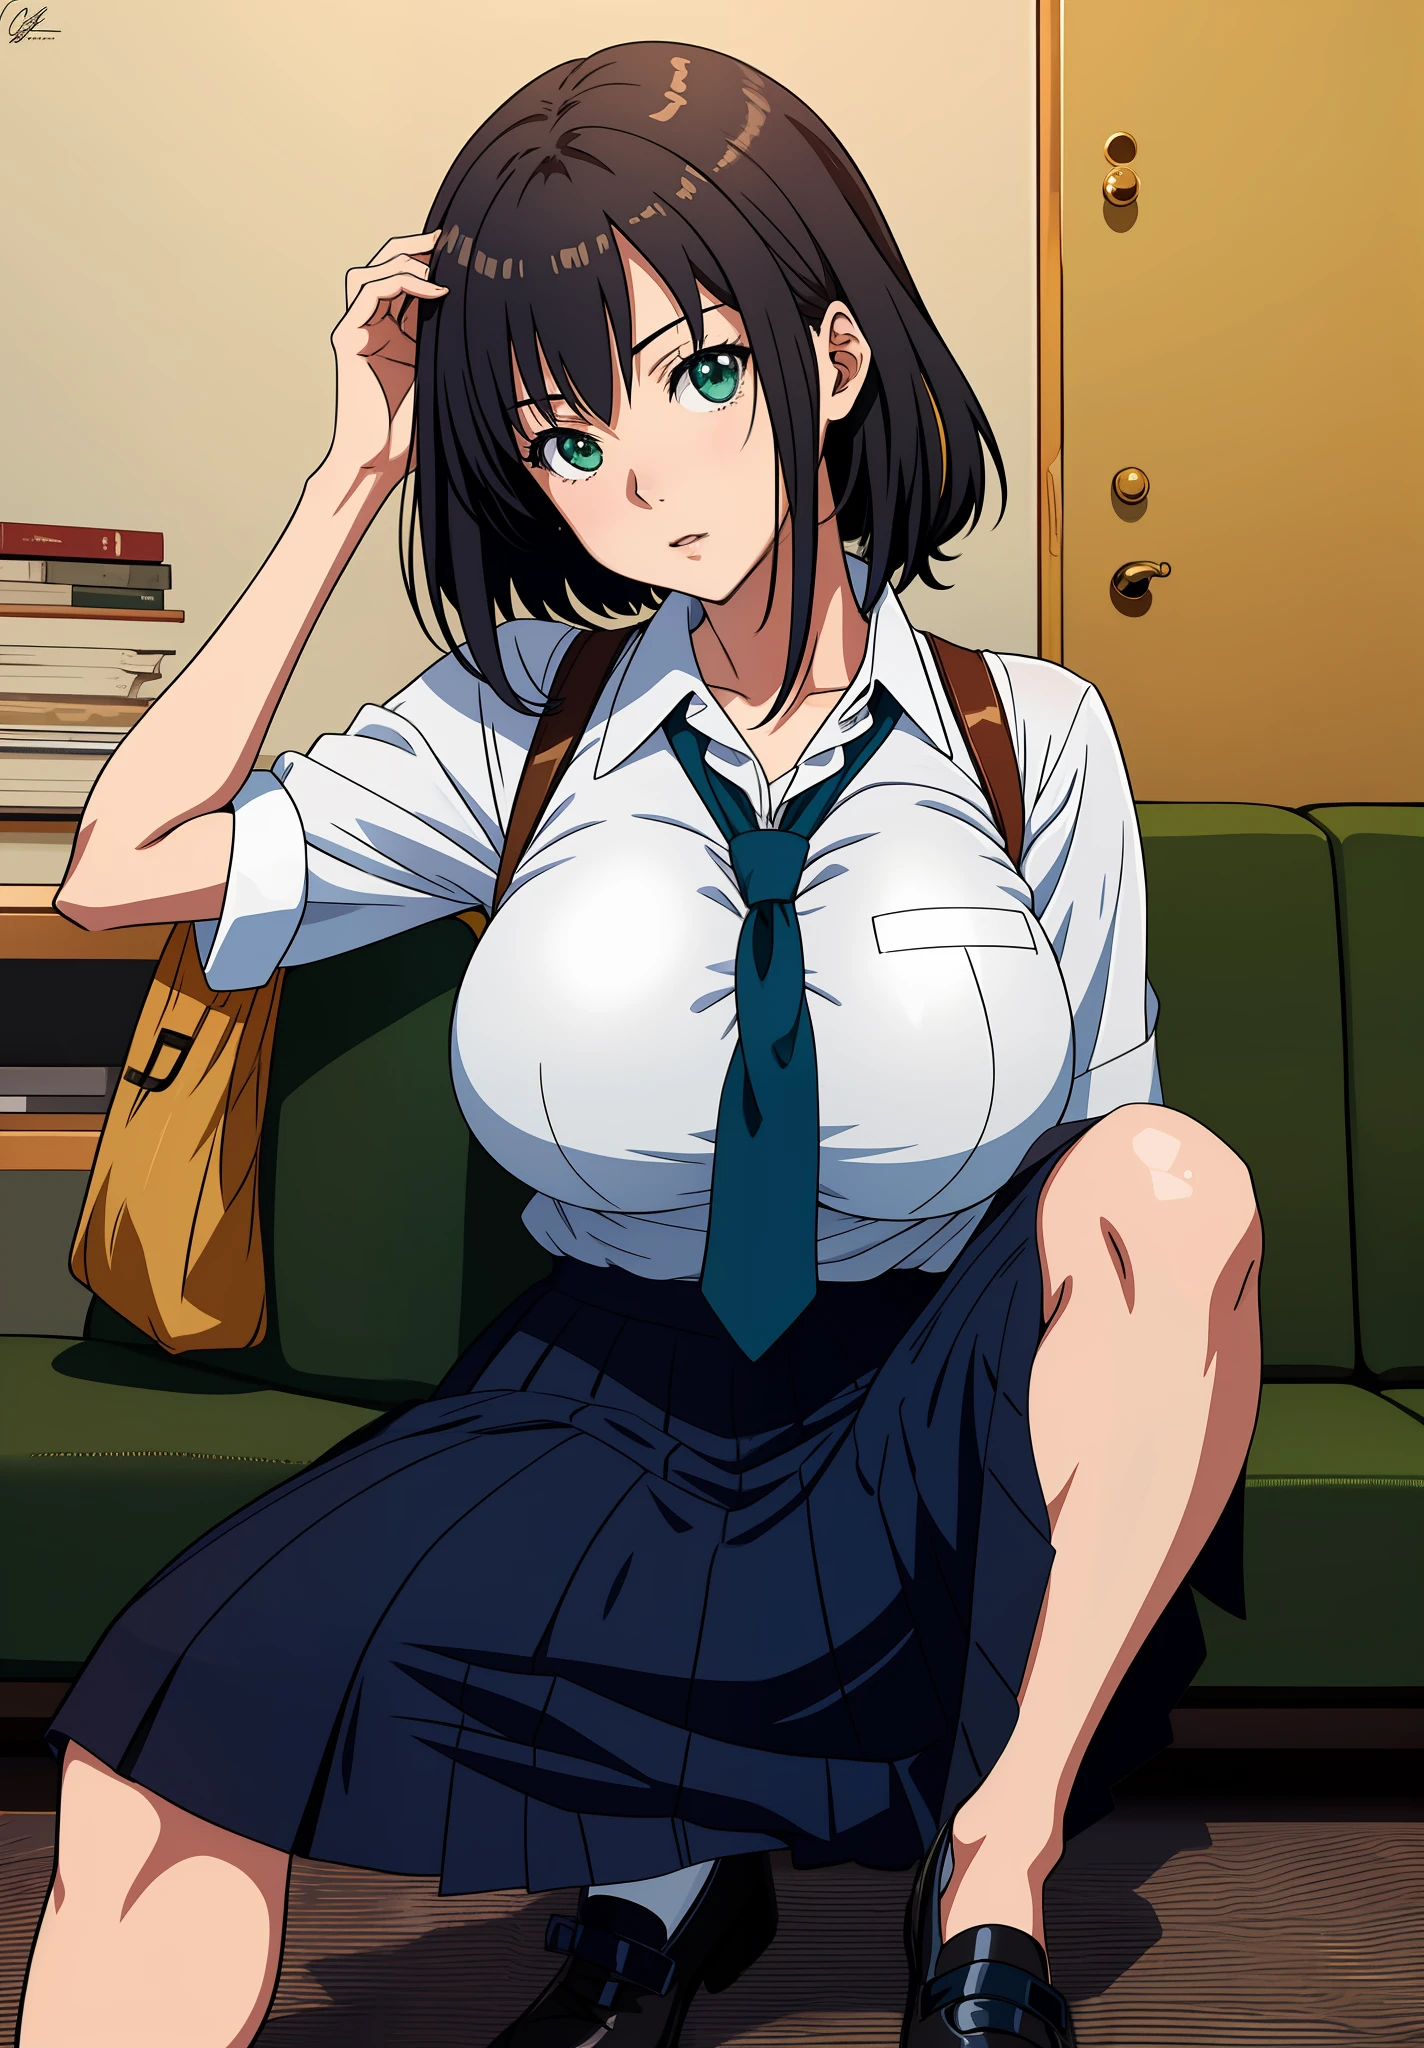 anime girl with big breast sitting on a green couch, oppai, realistic schoolgirl, fubuki, ecchi, shoujo, seductive anime girl, a hyperrealistic schoolgirl, hyperrealistic , school girl, ecchi anime style, the anime girl is crouching,